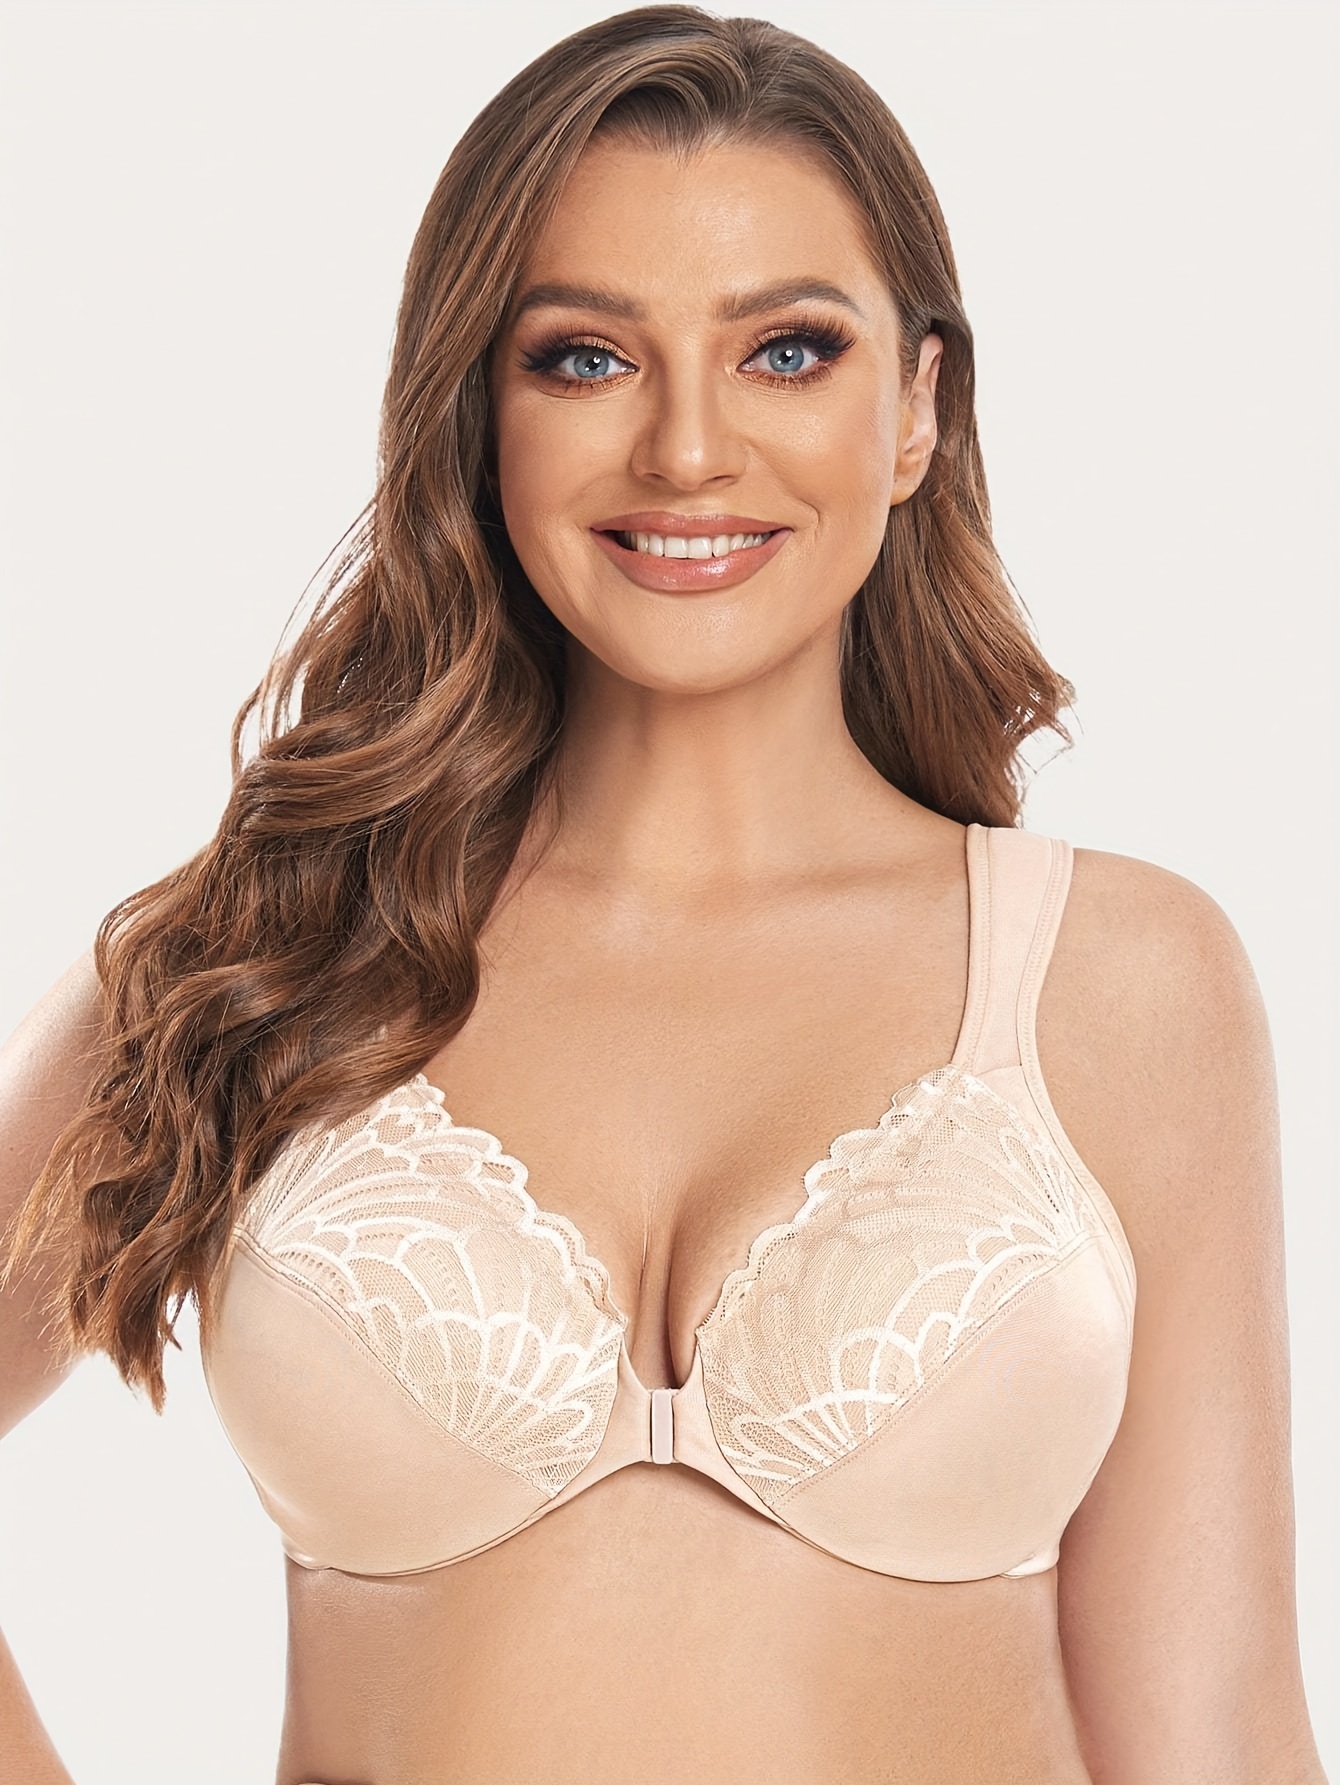 MELENECA Front Closure Bras for Women Sexy Lace Plus Size Underwire Unlined